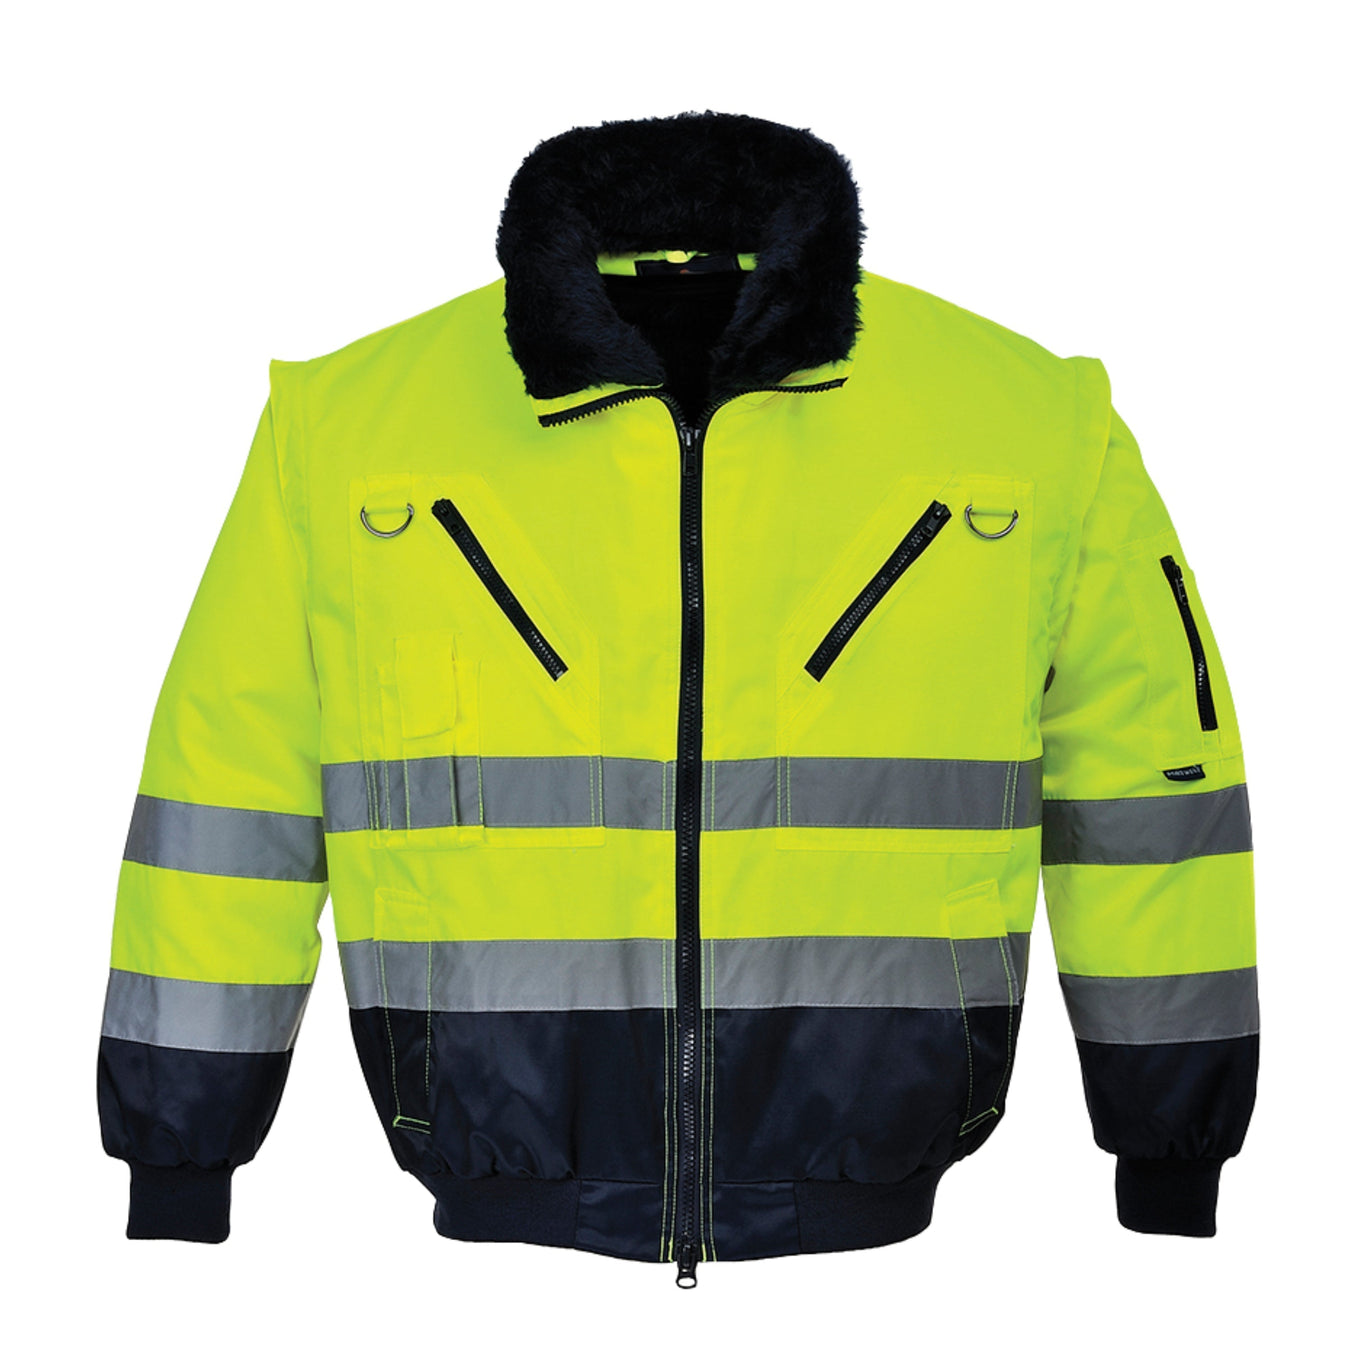 Xtreme High Visibility Reflective Safety Jackets for Men Polar Fleece Lining ANSI Class 3 Hi Vis Winter Bomber Jacket Hoodie